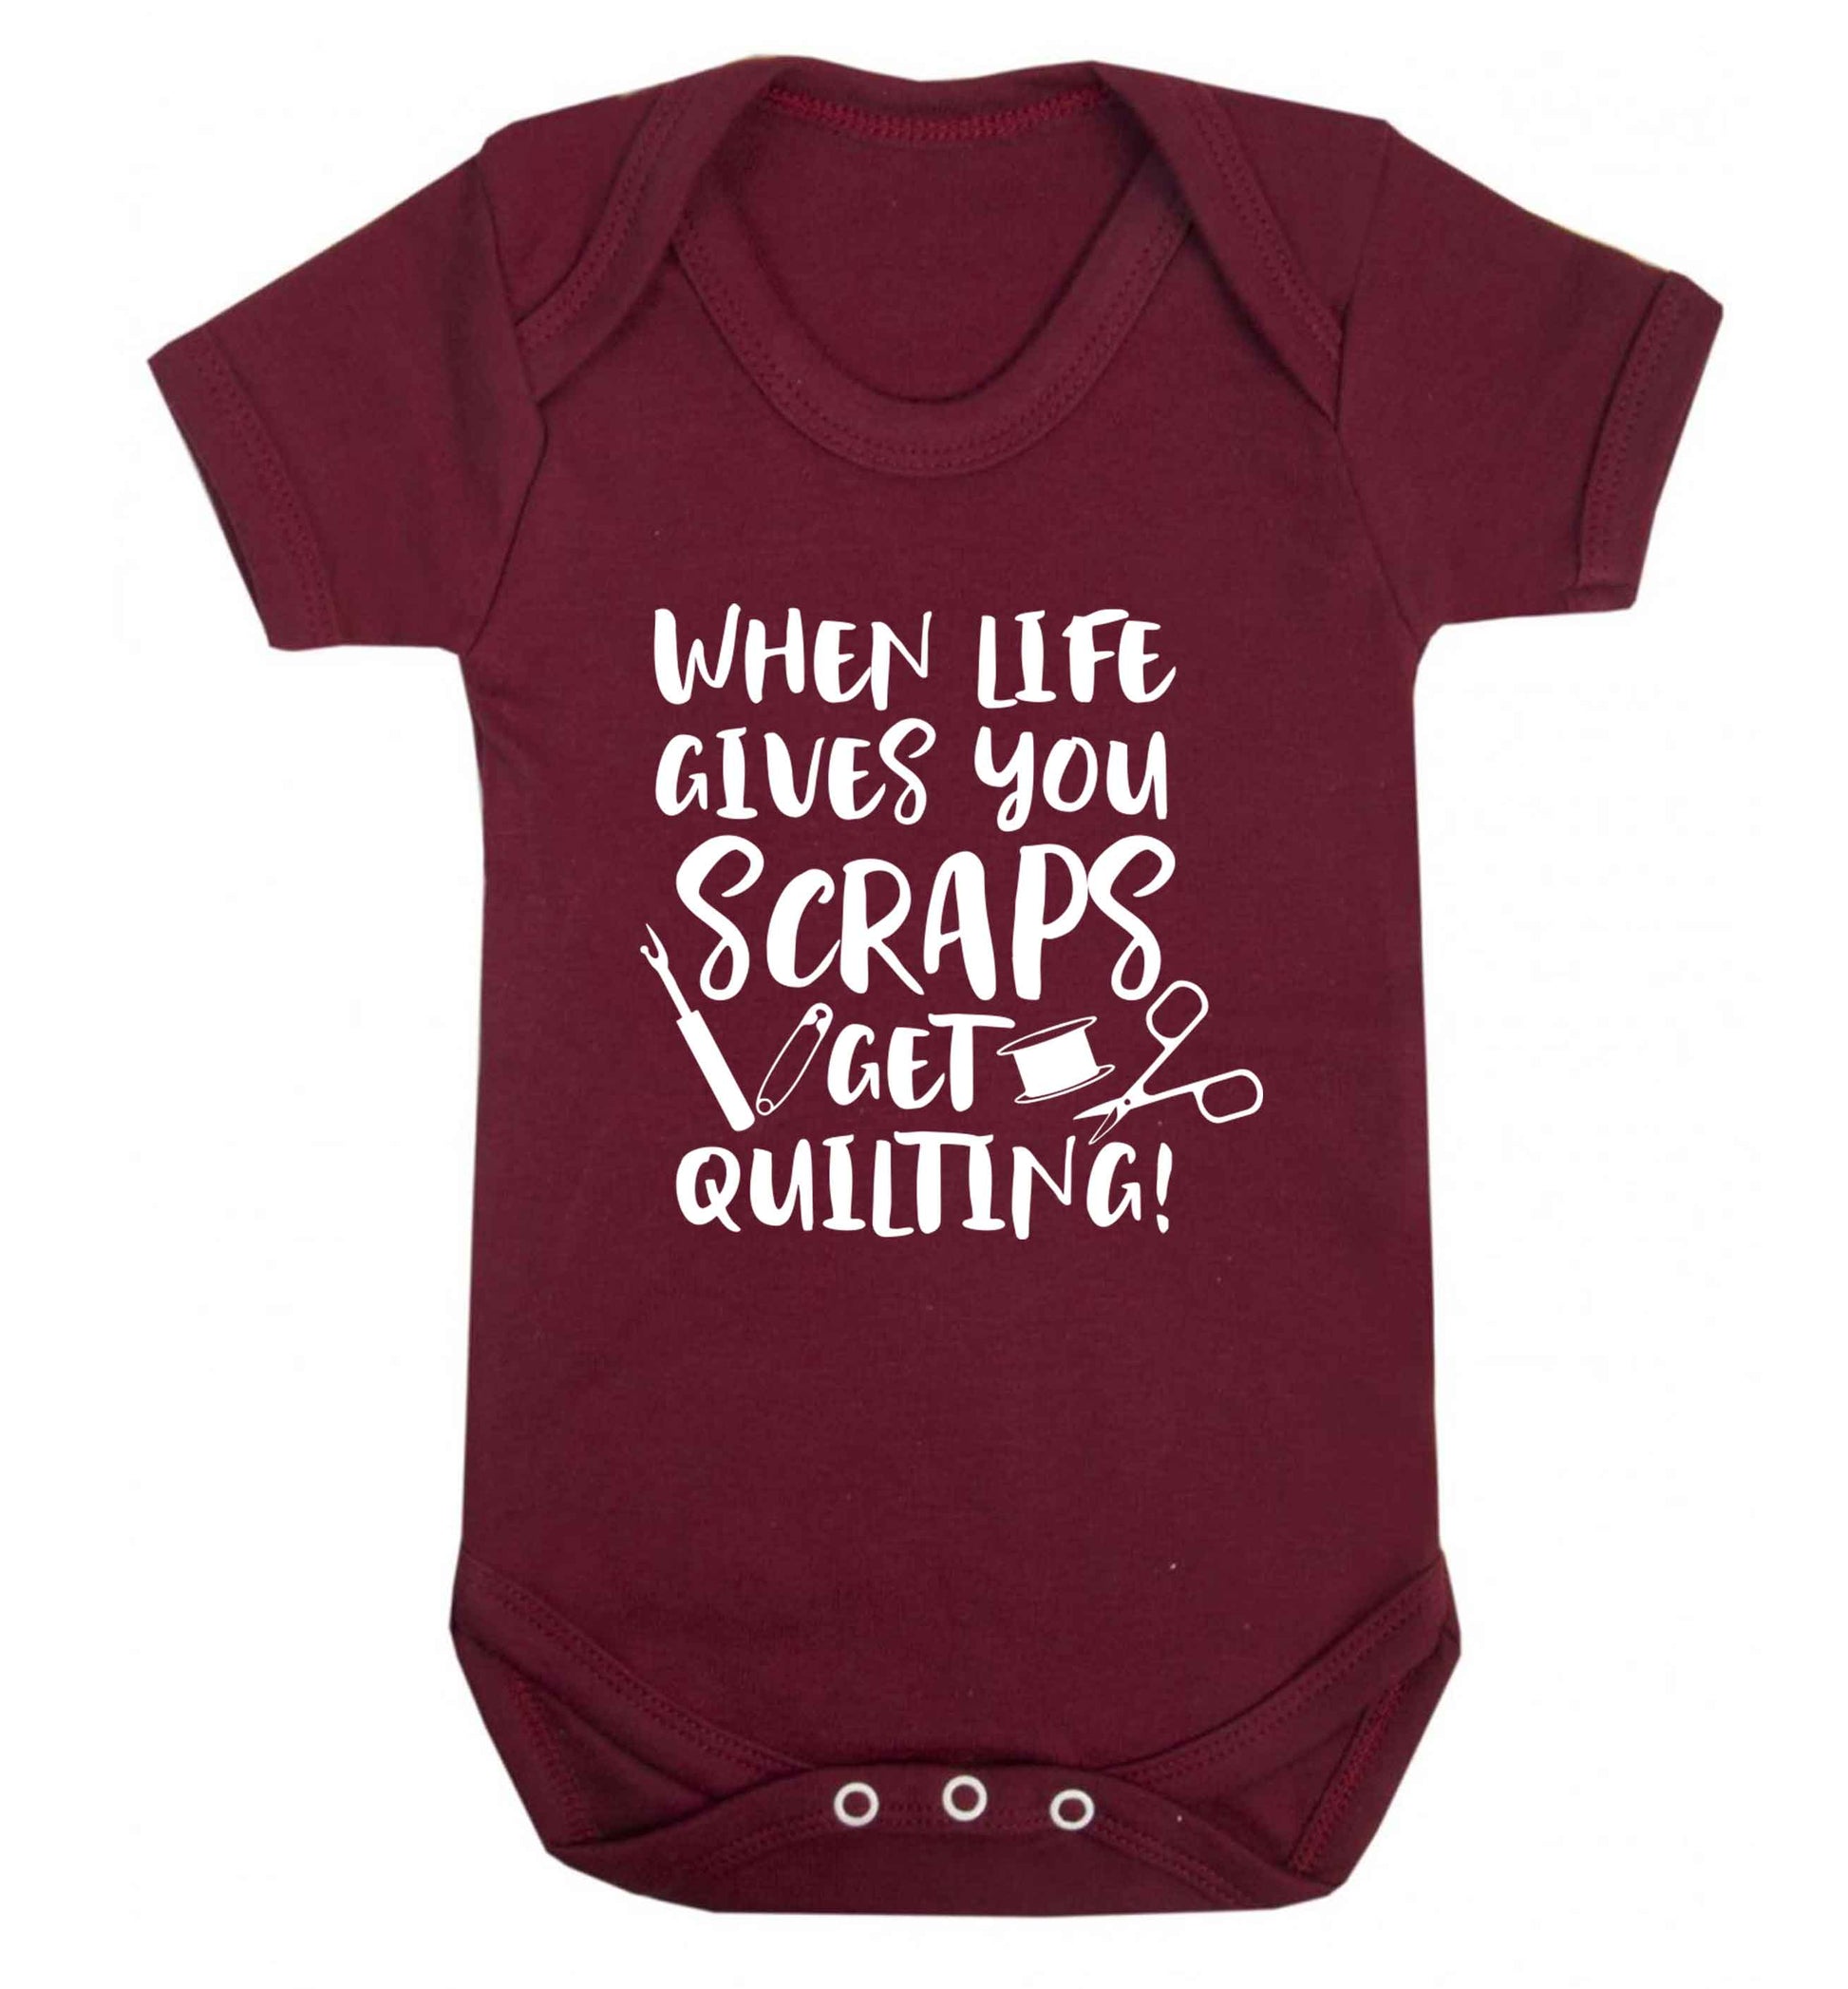 When life gives you scraps get quilting! Baby Vest maroon 18-24 months